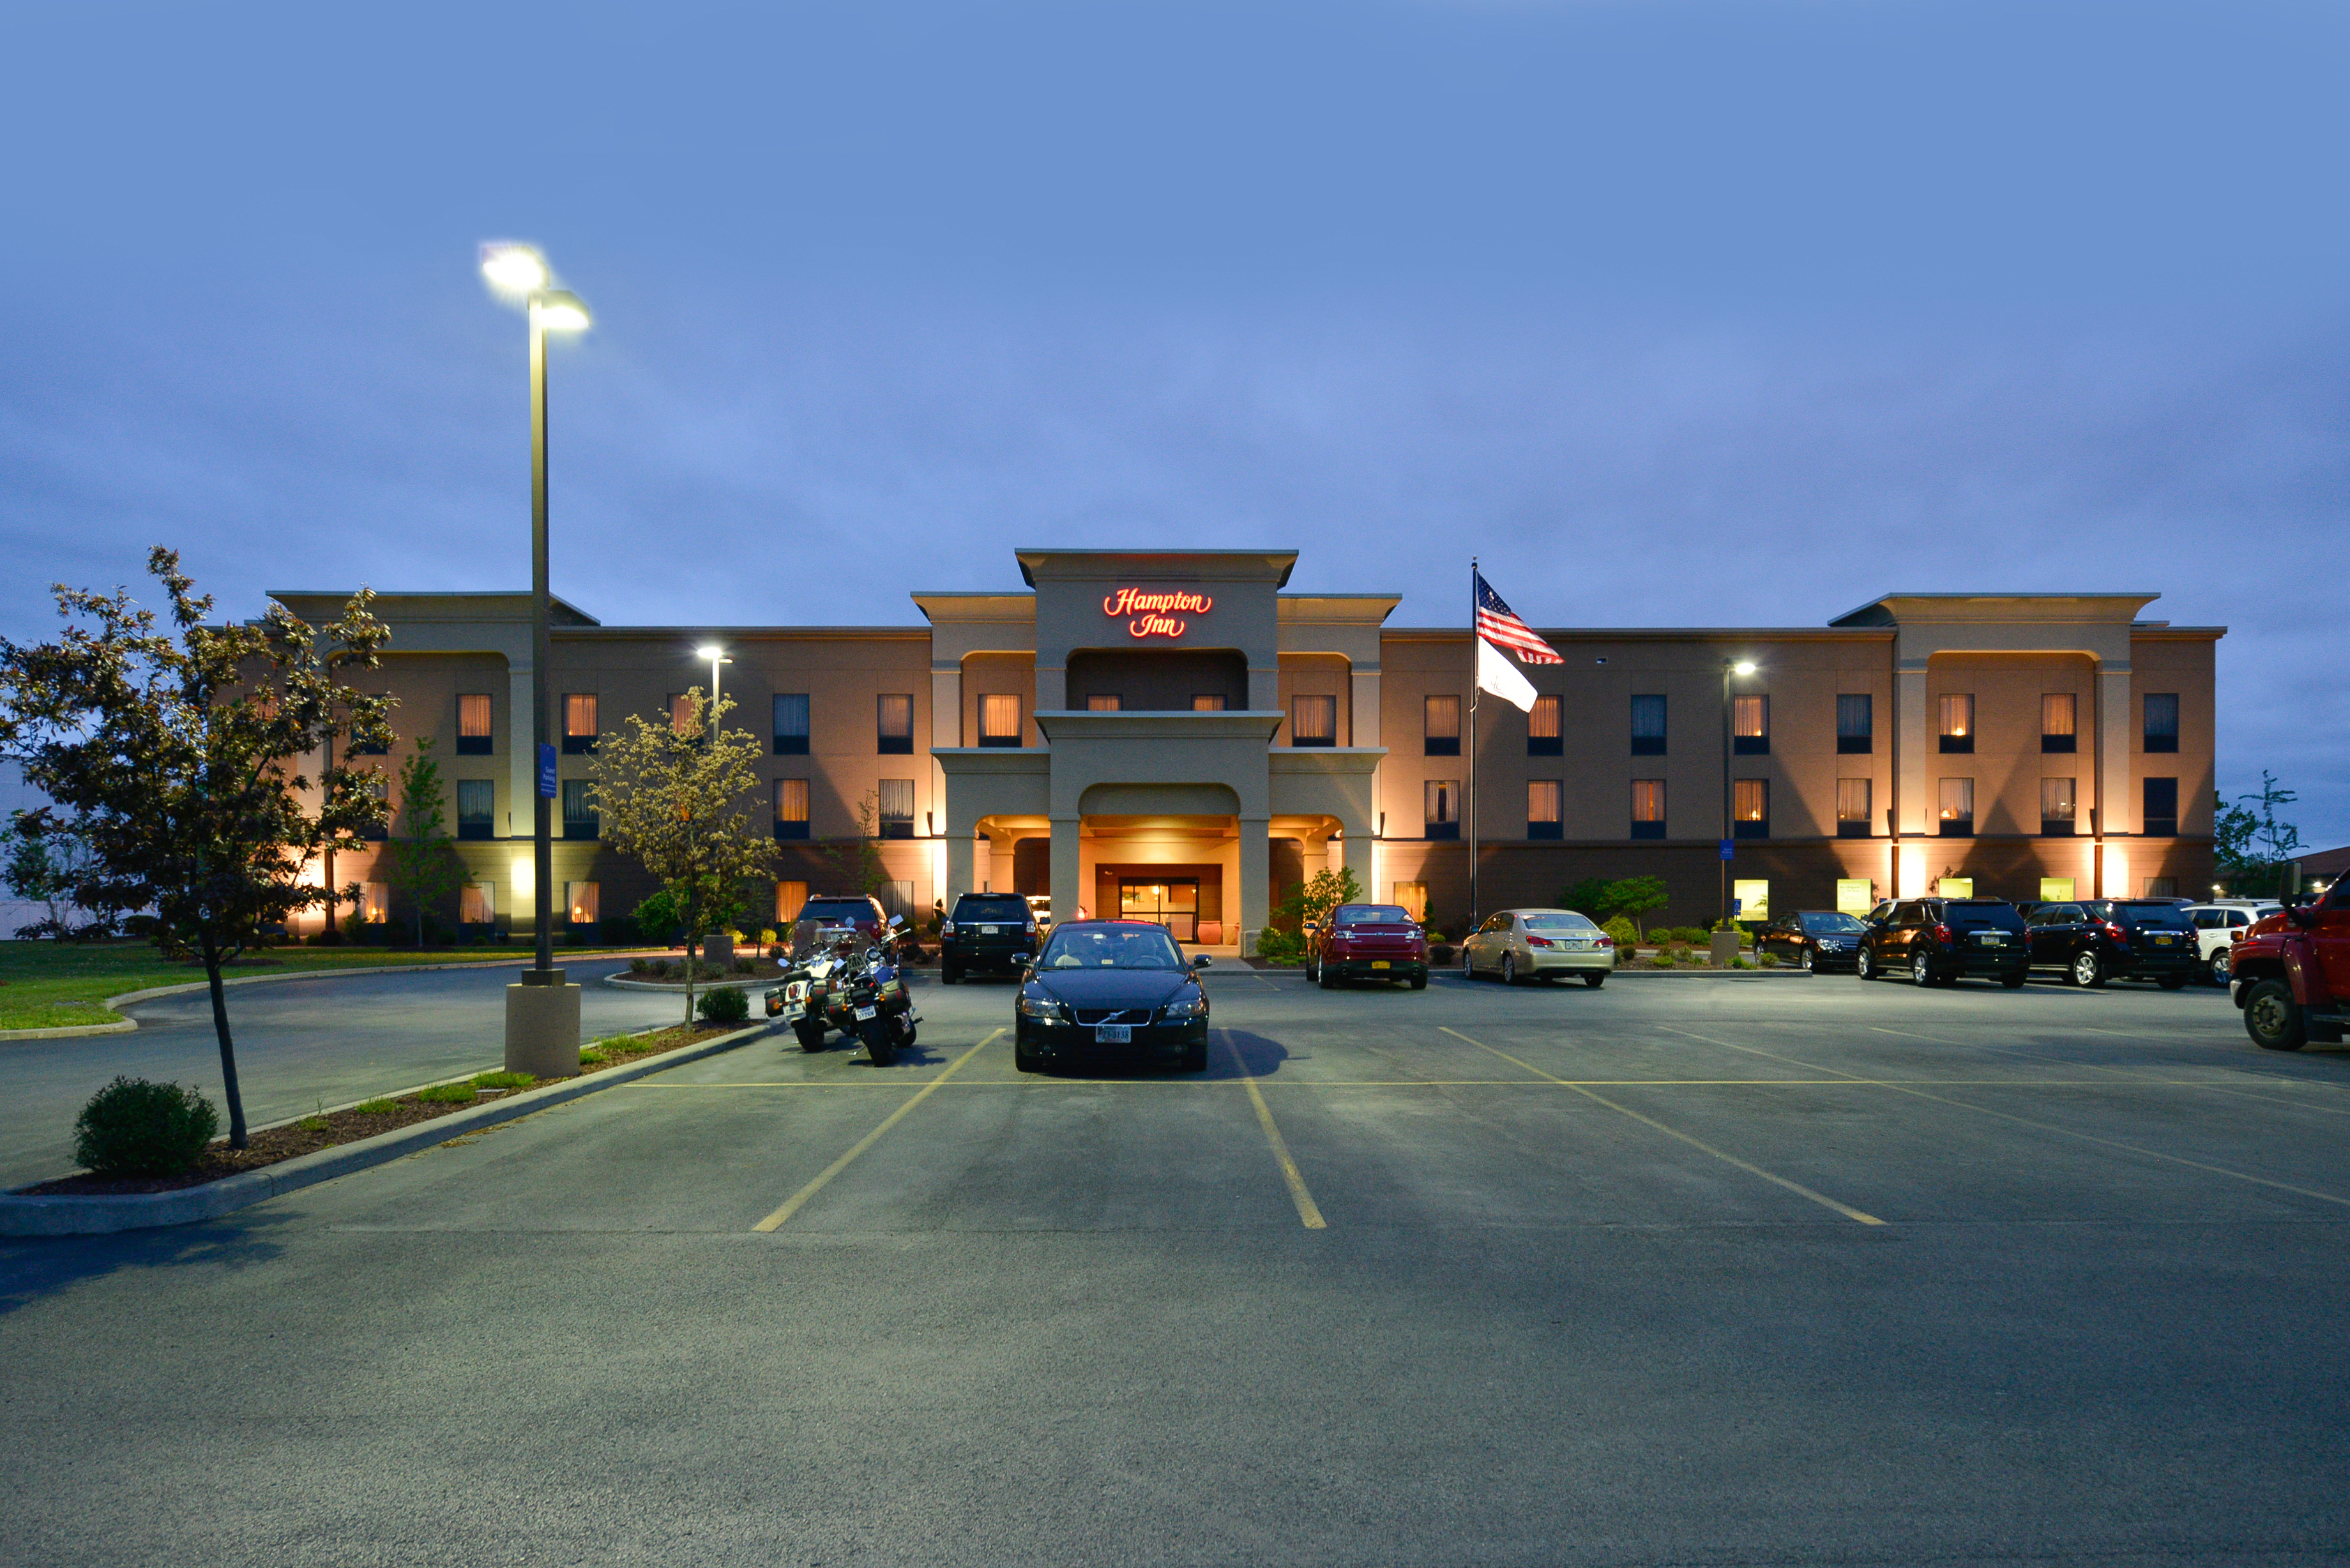 Illuminated Hotel Exterior, Signage, Porte Cochère, Flagpoles, Landscaping, and Guest Cars on Parking Lot at Night